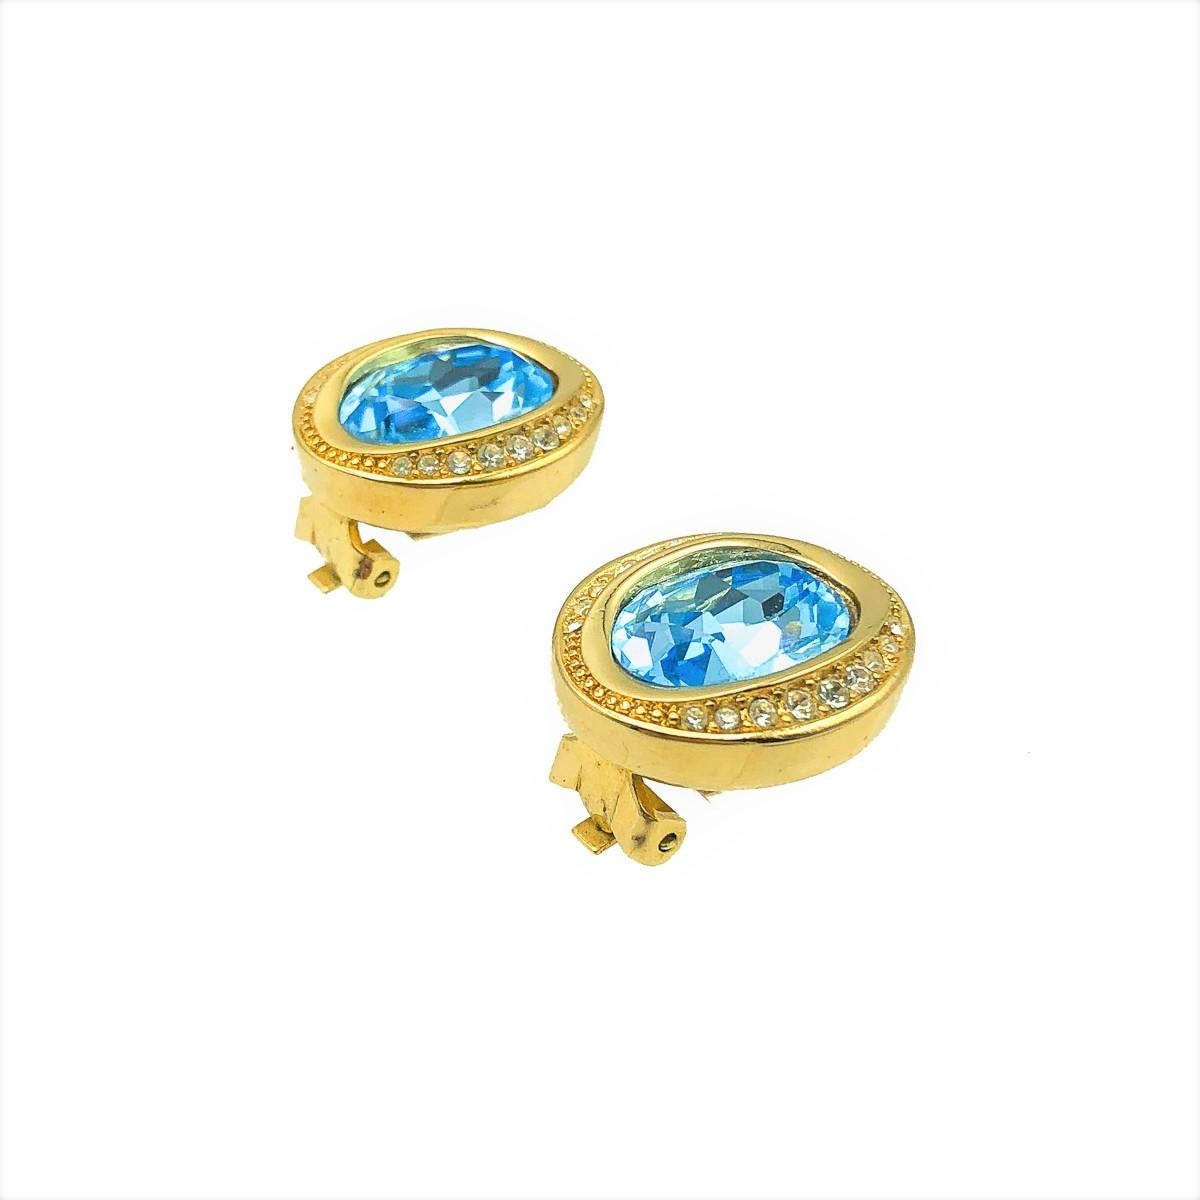 A pair of ultra feminine and very pretty Vintage Dior Aqua Earrings. Crafted in weighty gold plated metal and set with glass crystals. In very good vintage condition. Signed. Approx. 2.2cms. A magical pair of clip on earrings from the House of Dior